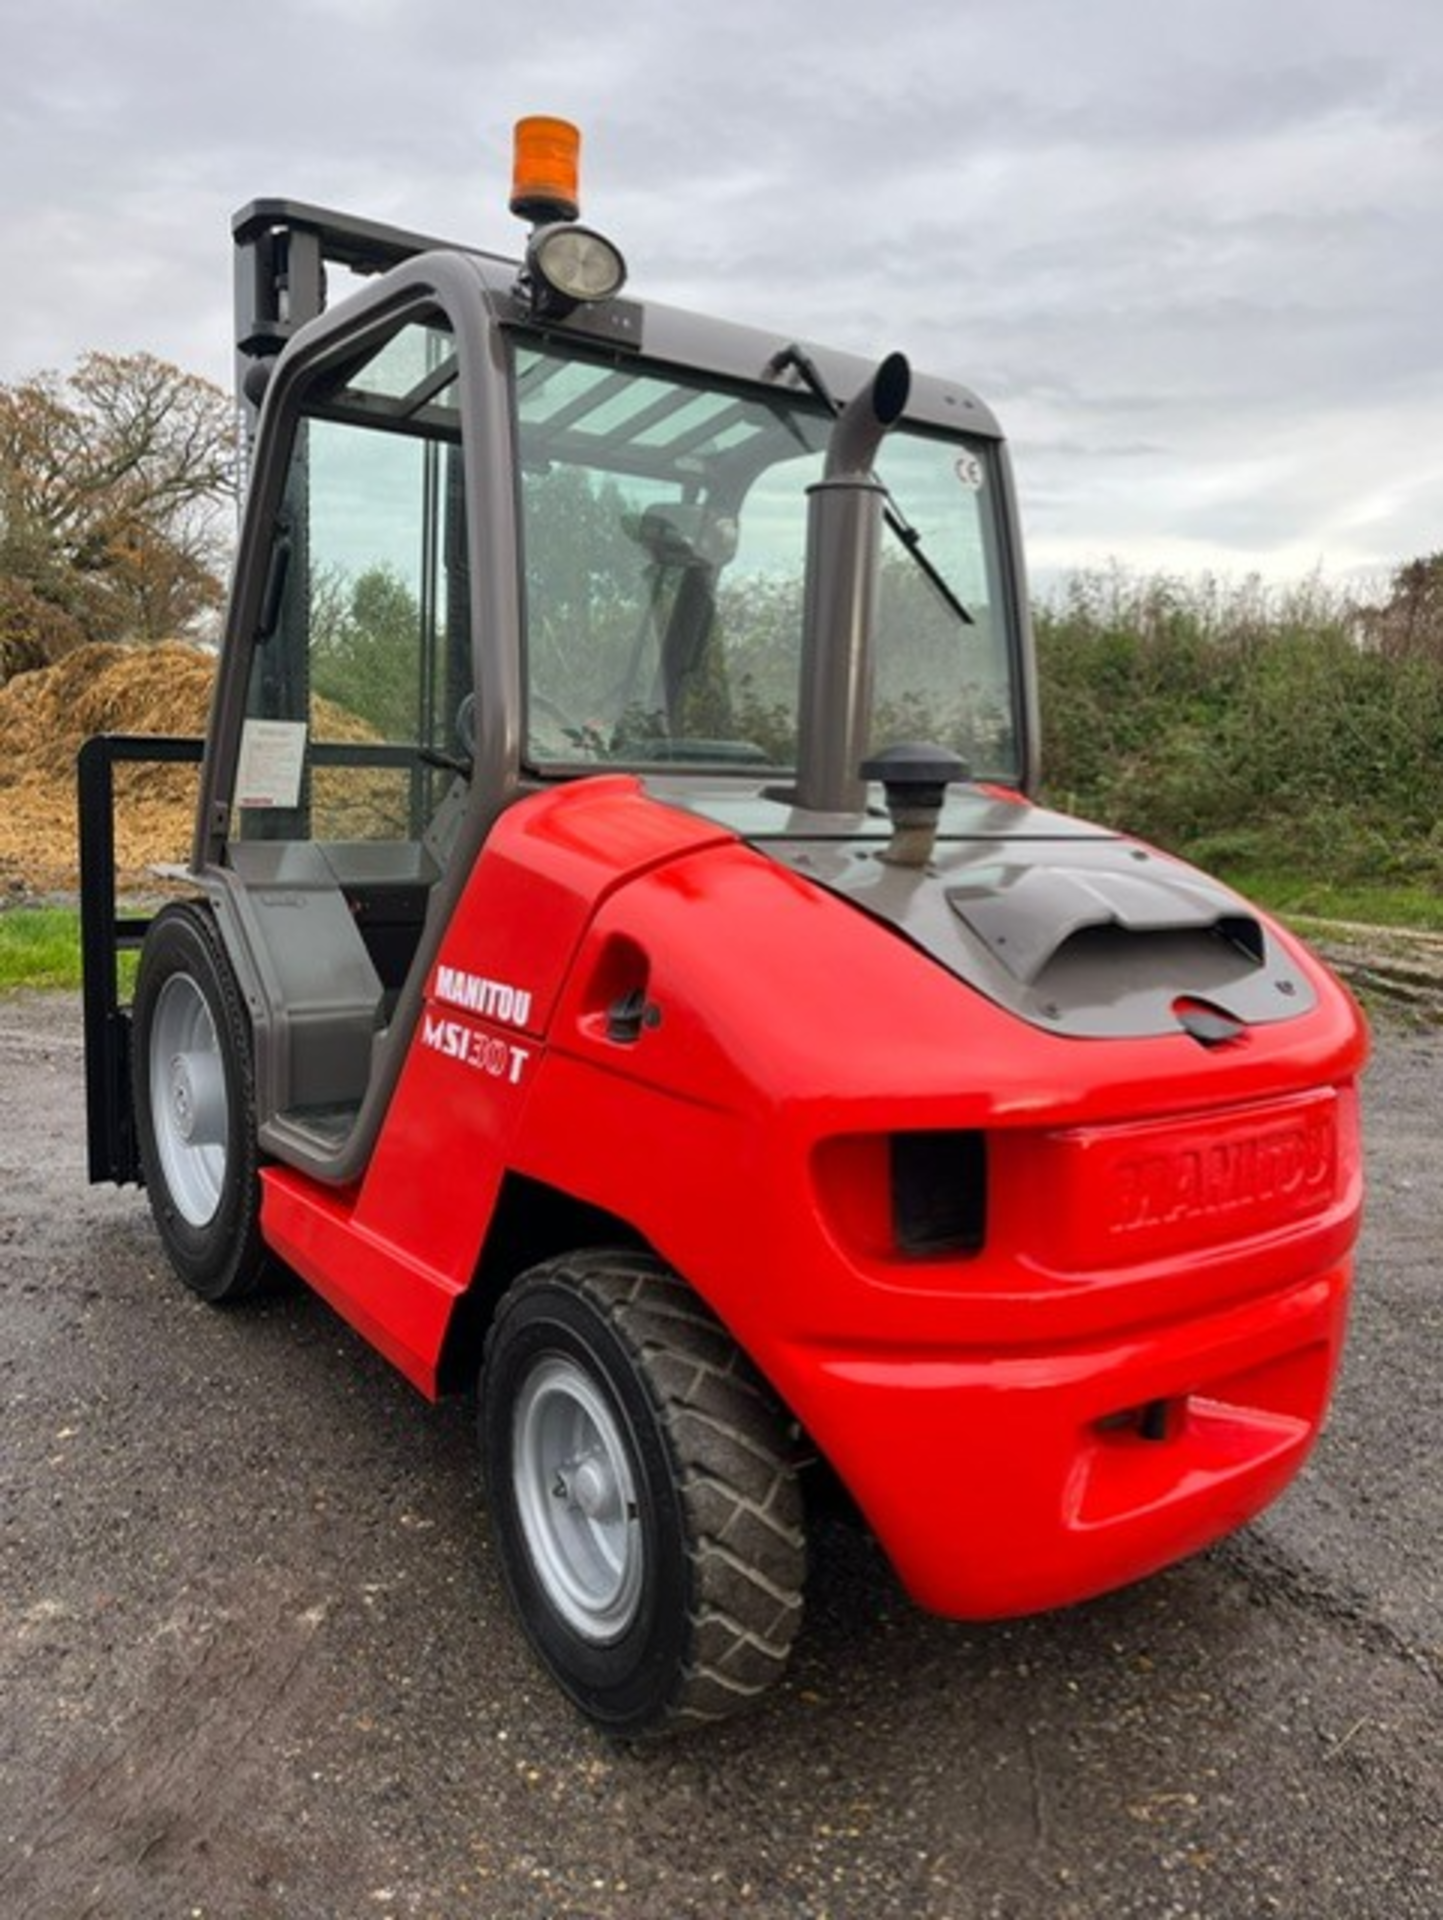 2012, MANITOU MSI30, 3 Tonne 2WD - Rough Terrain Forklift - Image 2 of 7